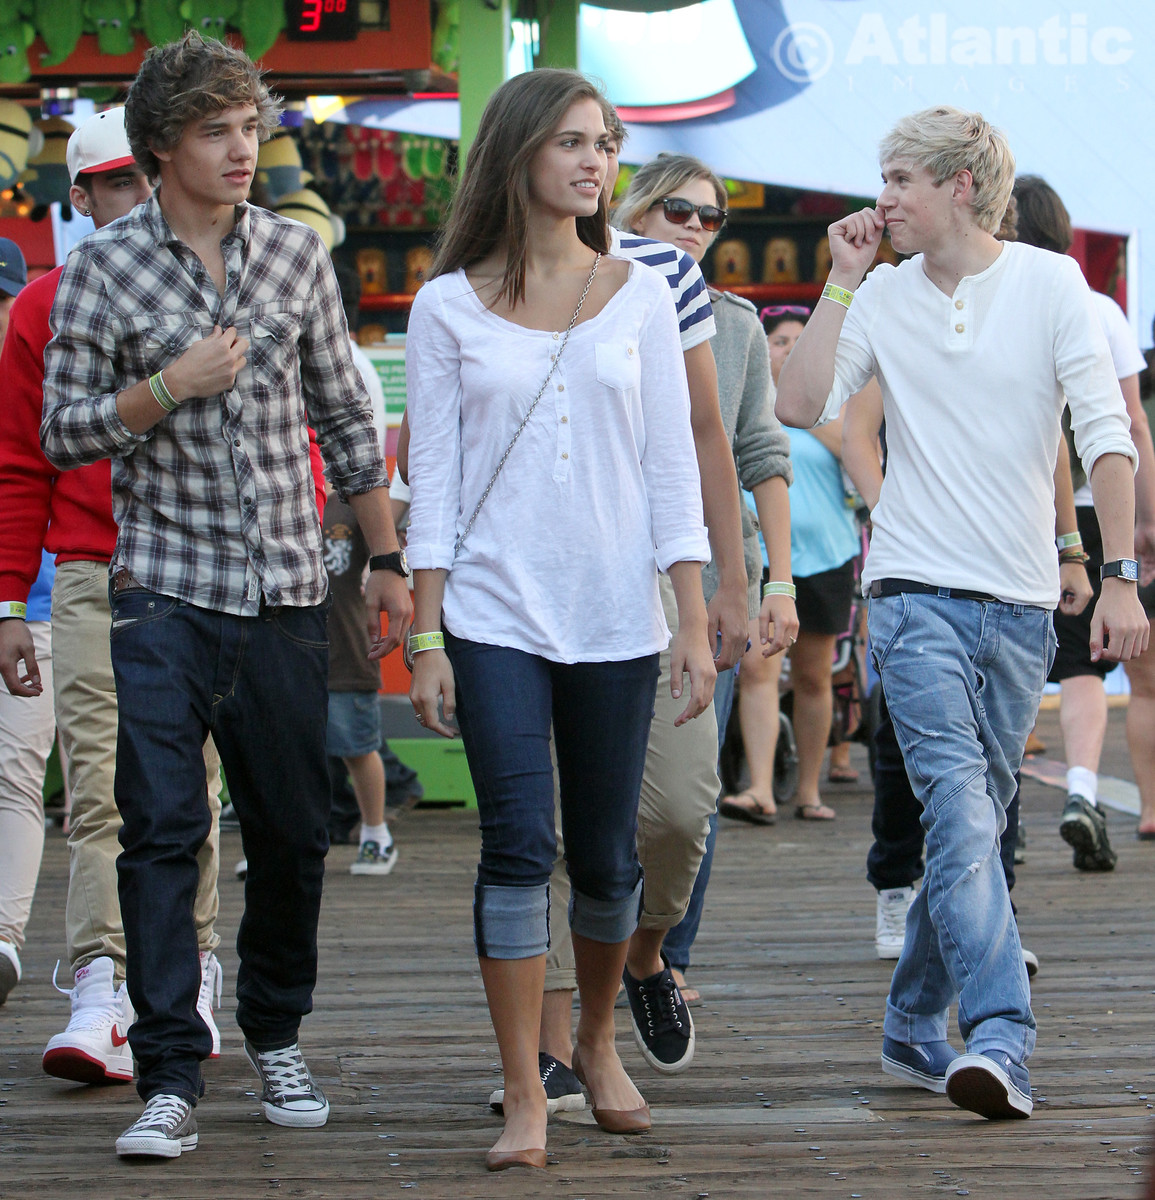 [REQ] One Direction at the Santa Monica Pier (2011)